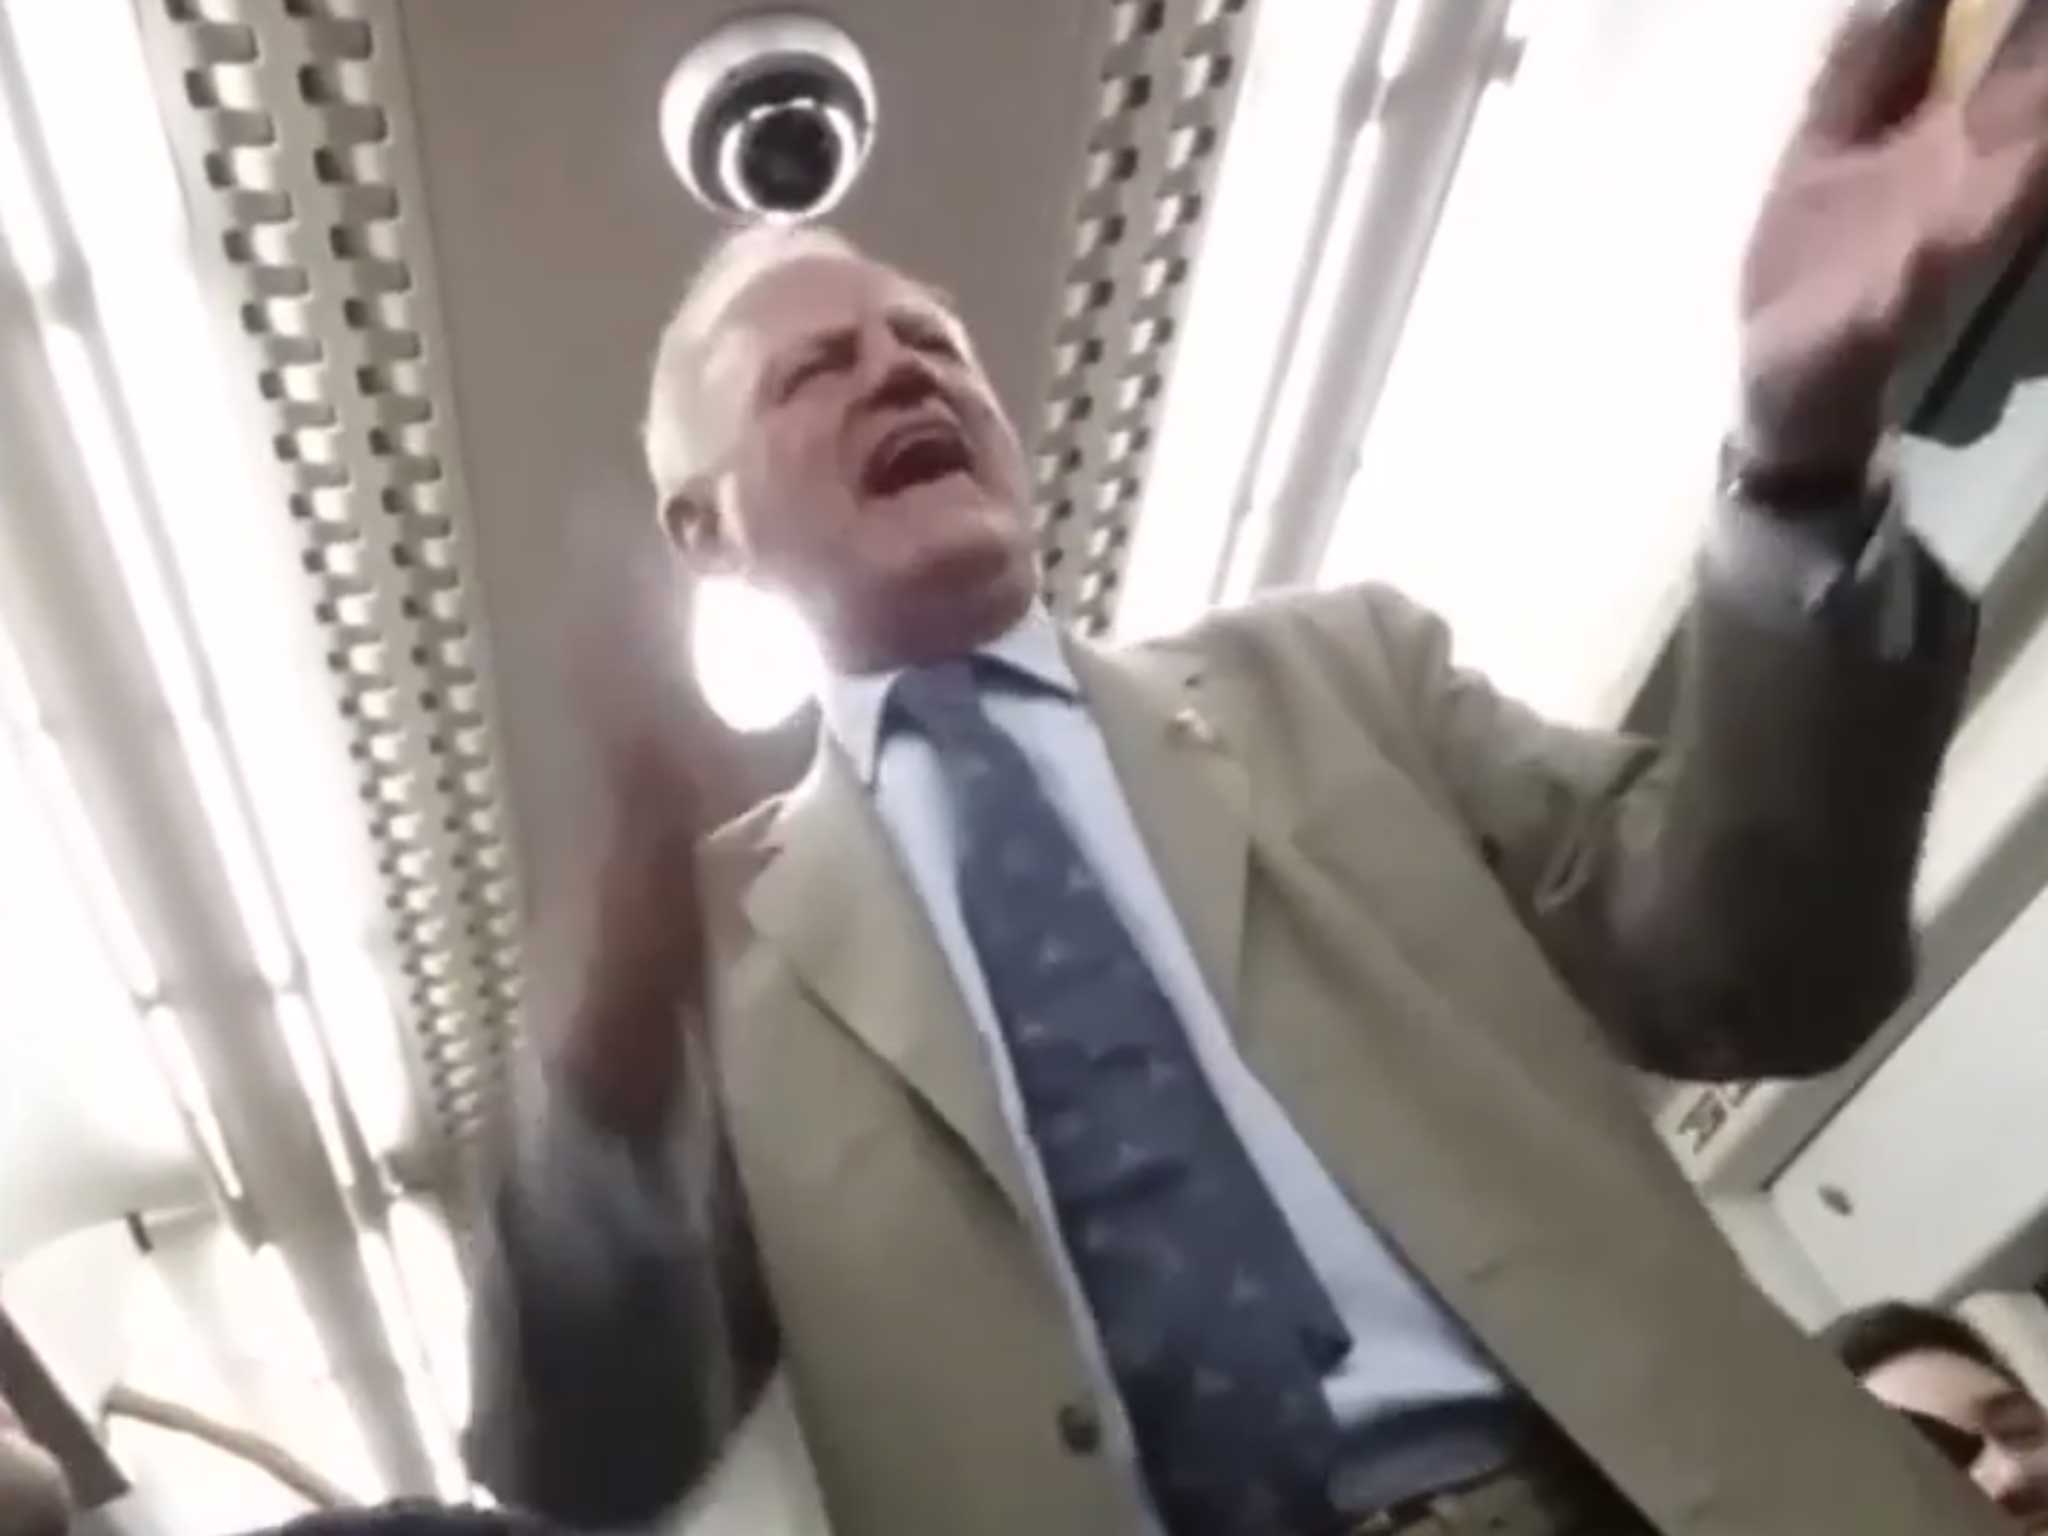 The pensioner on the train mid-song